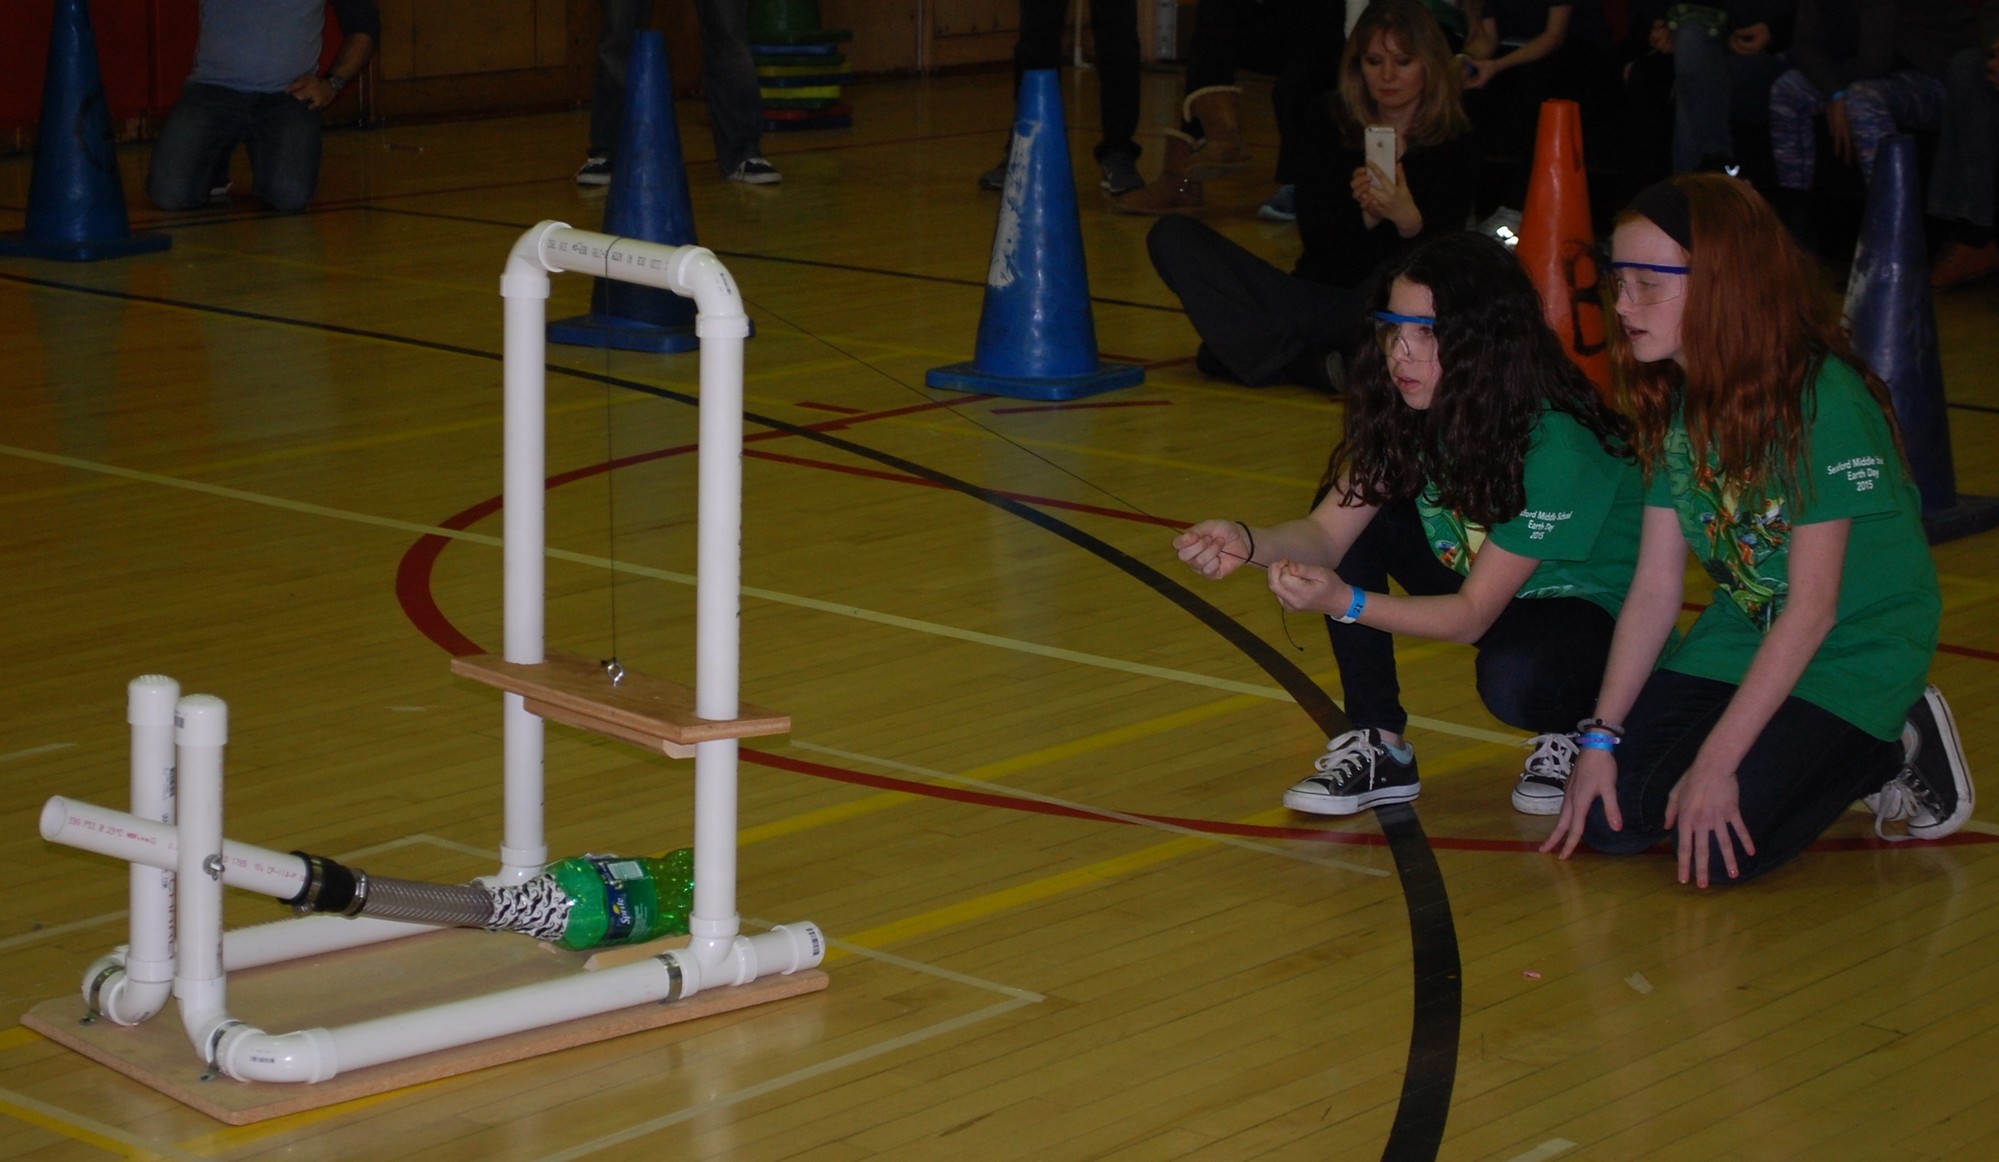 Hailey Galison and Sarah Keane tested their machine for Seaford in the air trajectory event at the regional Science Olympiad competition on March 5.